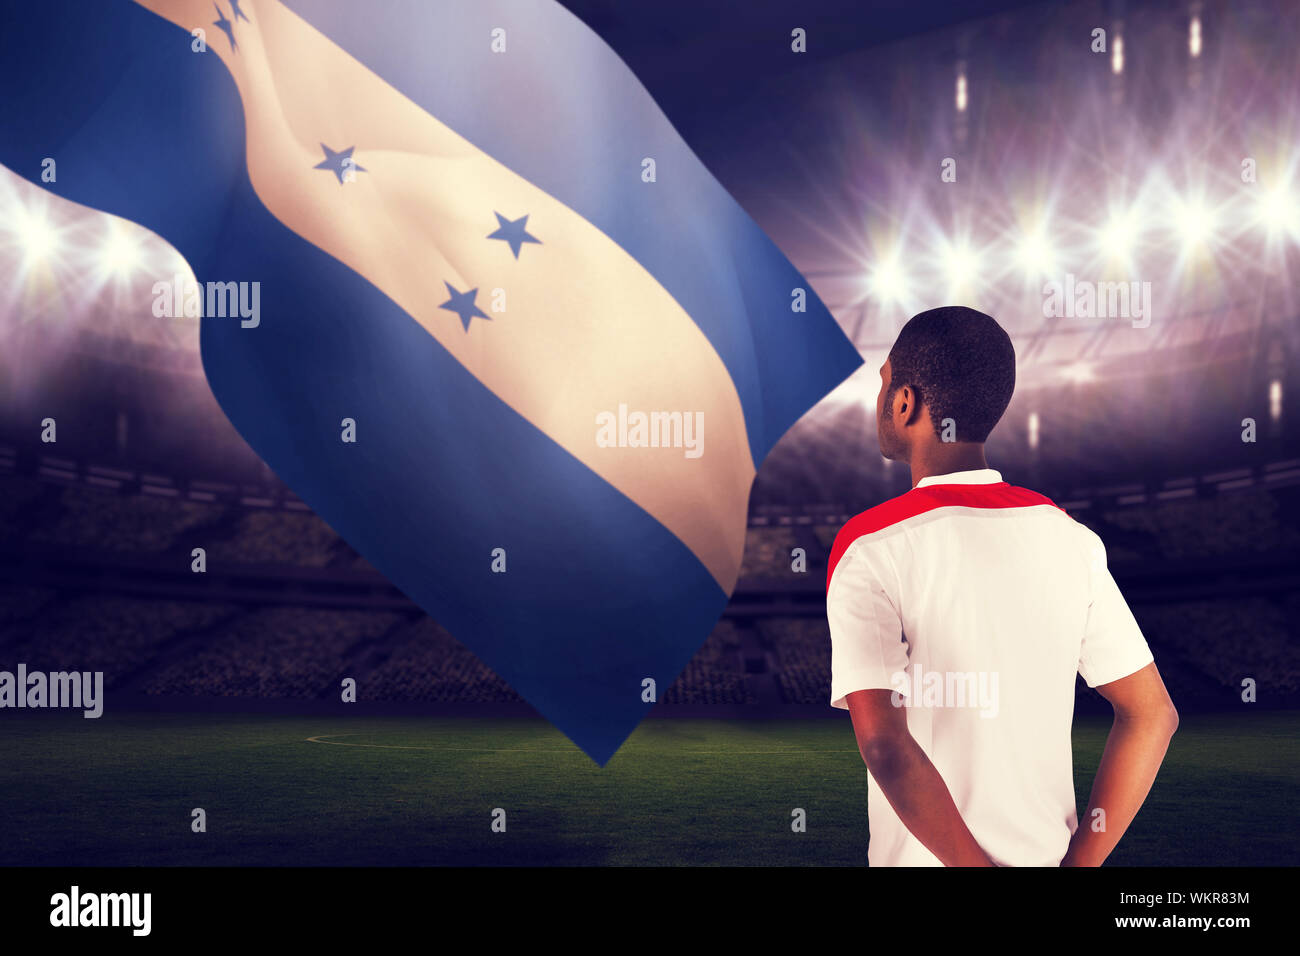 Football fan in white standing against large football stadium under night sky Stock Photo